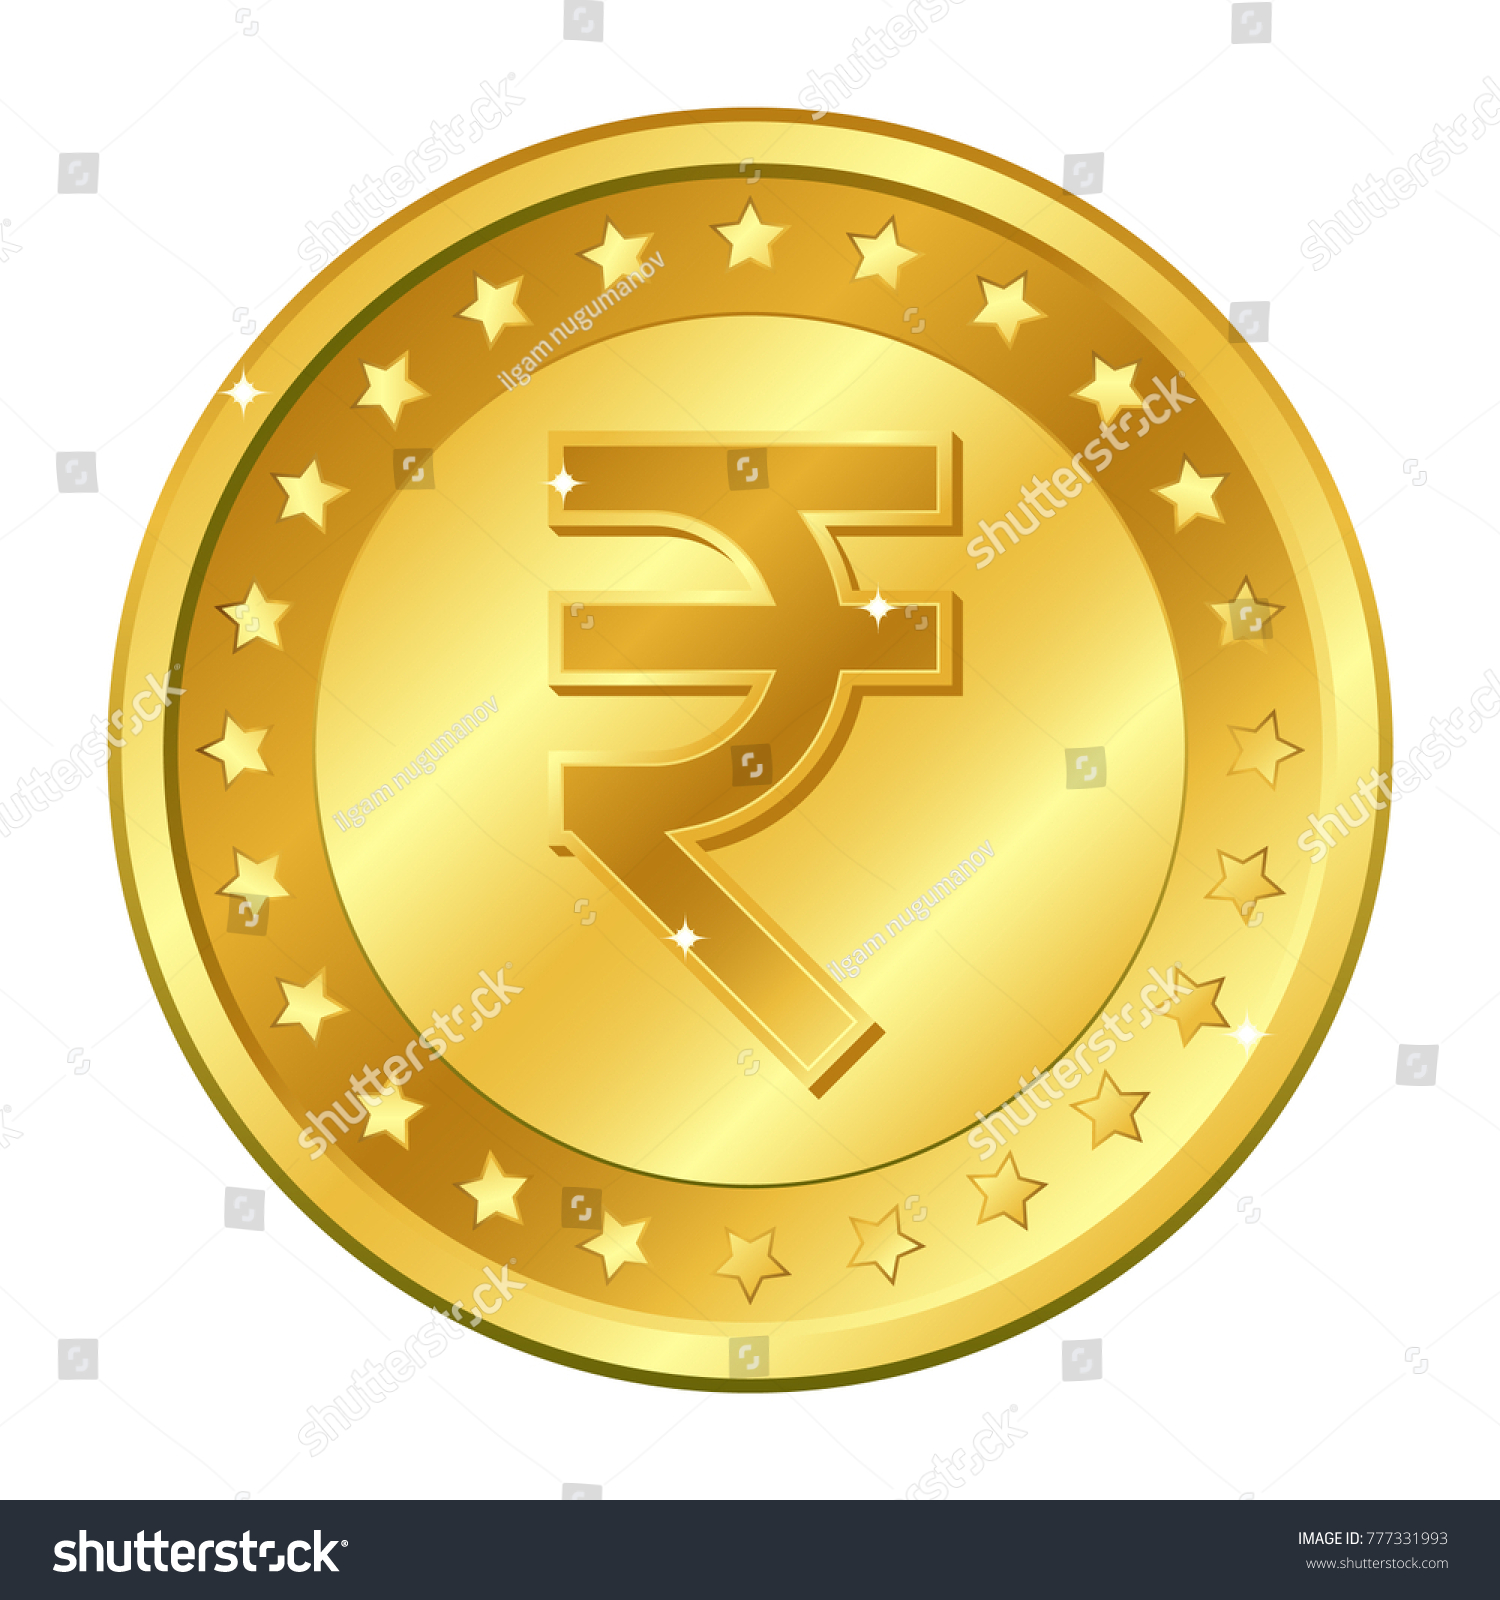 SVG of Rupee currency gold coin with stars. Indian currency. Vector illustration isolated on white background. Editable elements and glare. Suitable for casino game. Rich EPS 10 svg